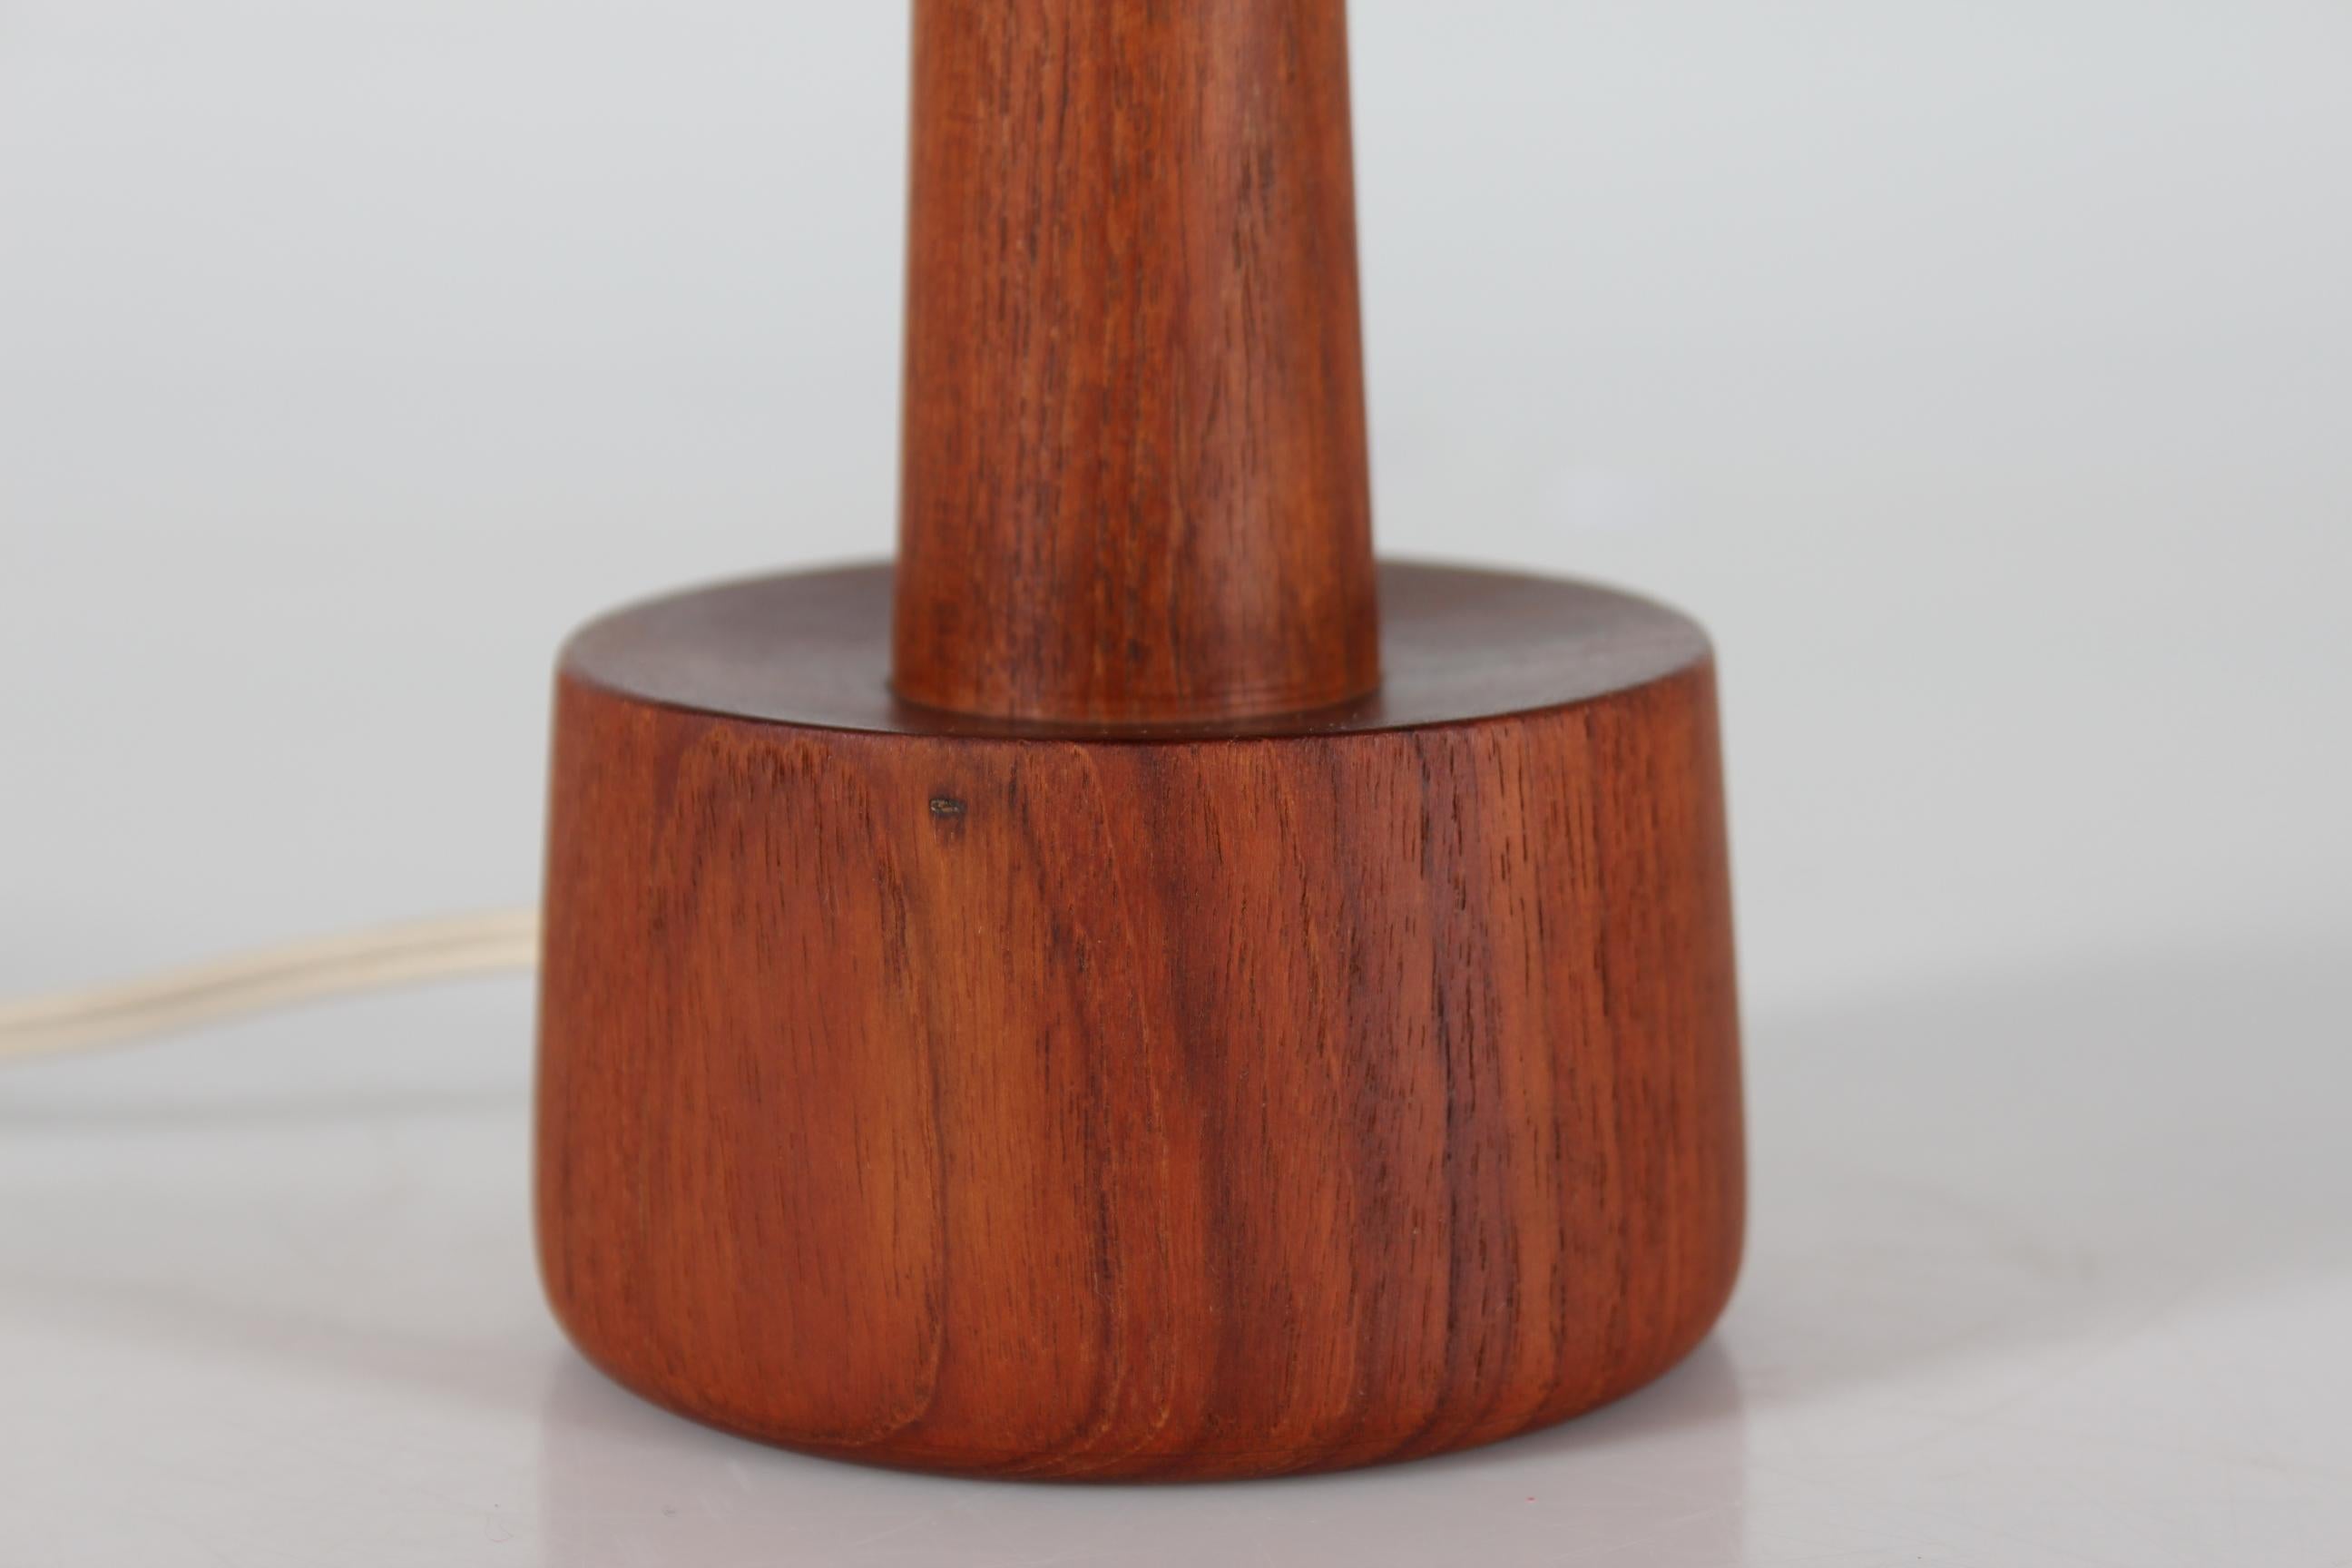 Danish Modernist table lamp from the 1970s.
The lamp is made of hand-turned solid teak, mounted with a cone shaped shade winded thin yarn of natural color.

Measures: Height 45 cm
Height lamp base only (without socket) 19 cm
Diameter shade 18